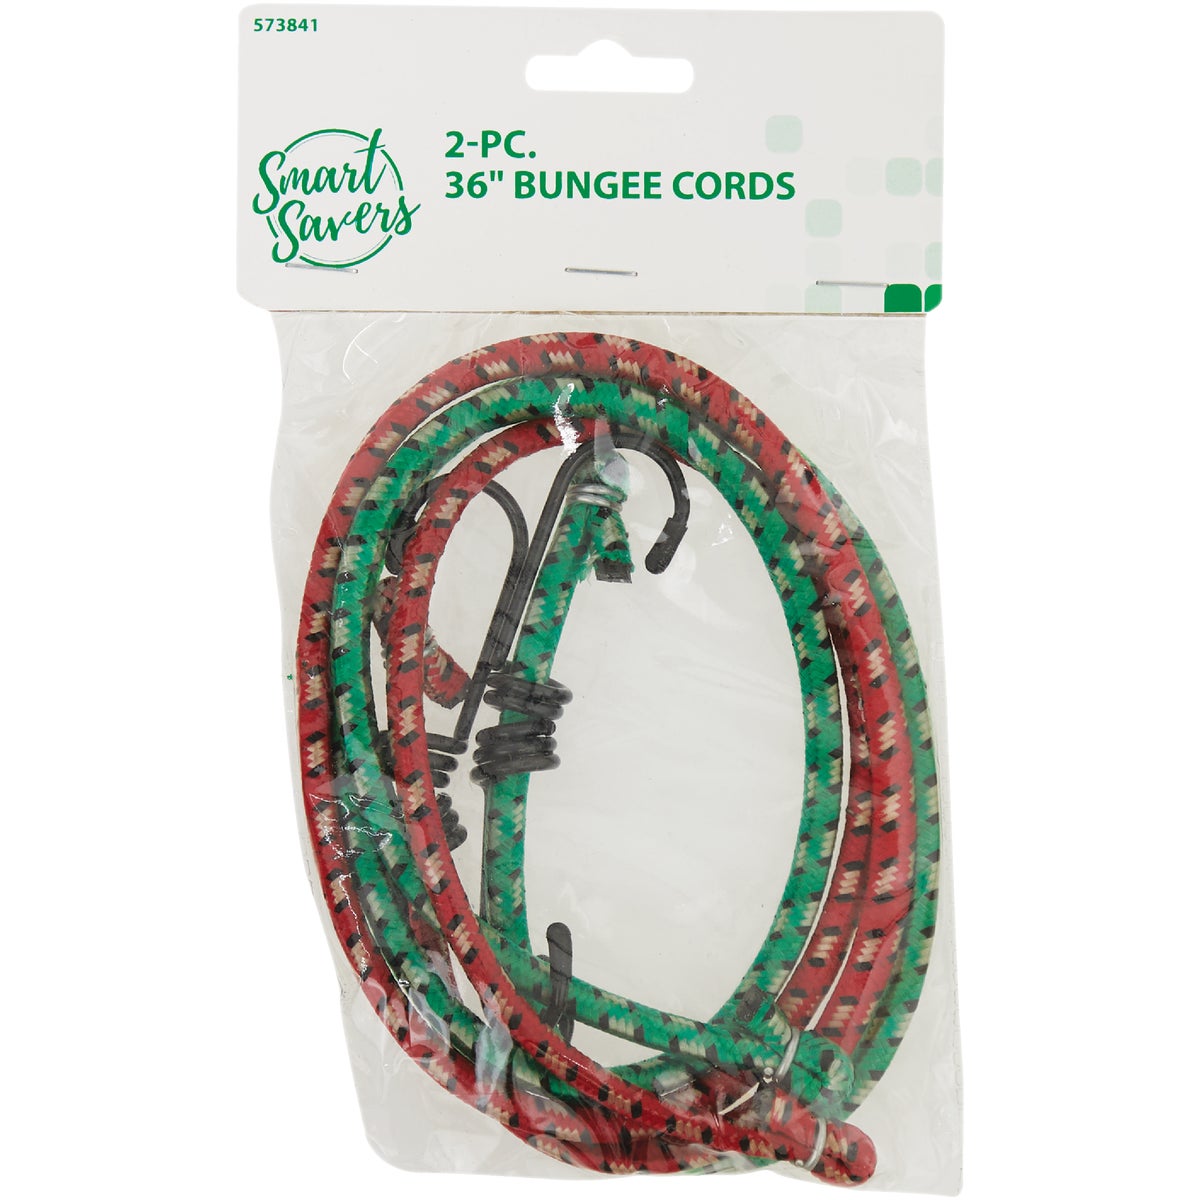 Smart Savers 6mm x 36 In. Metal with Safety End Bungee Cord (2-Pack)